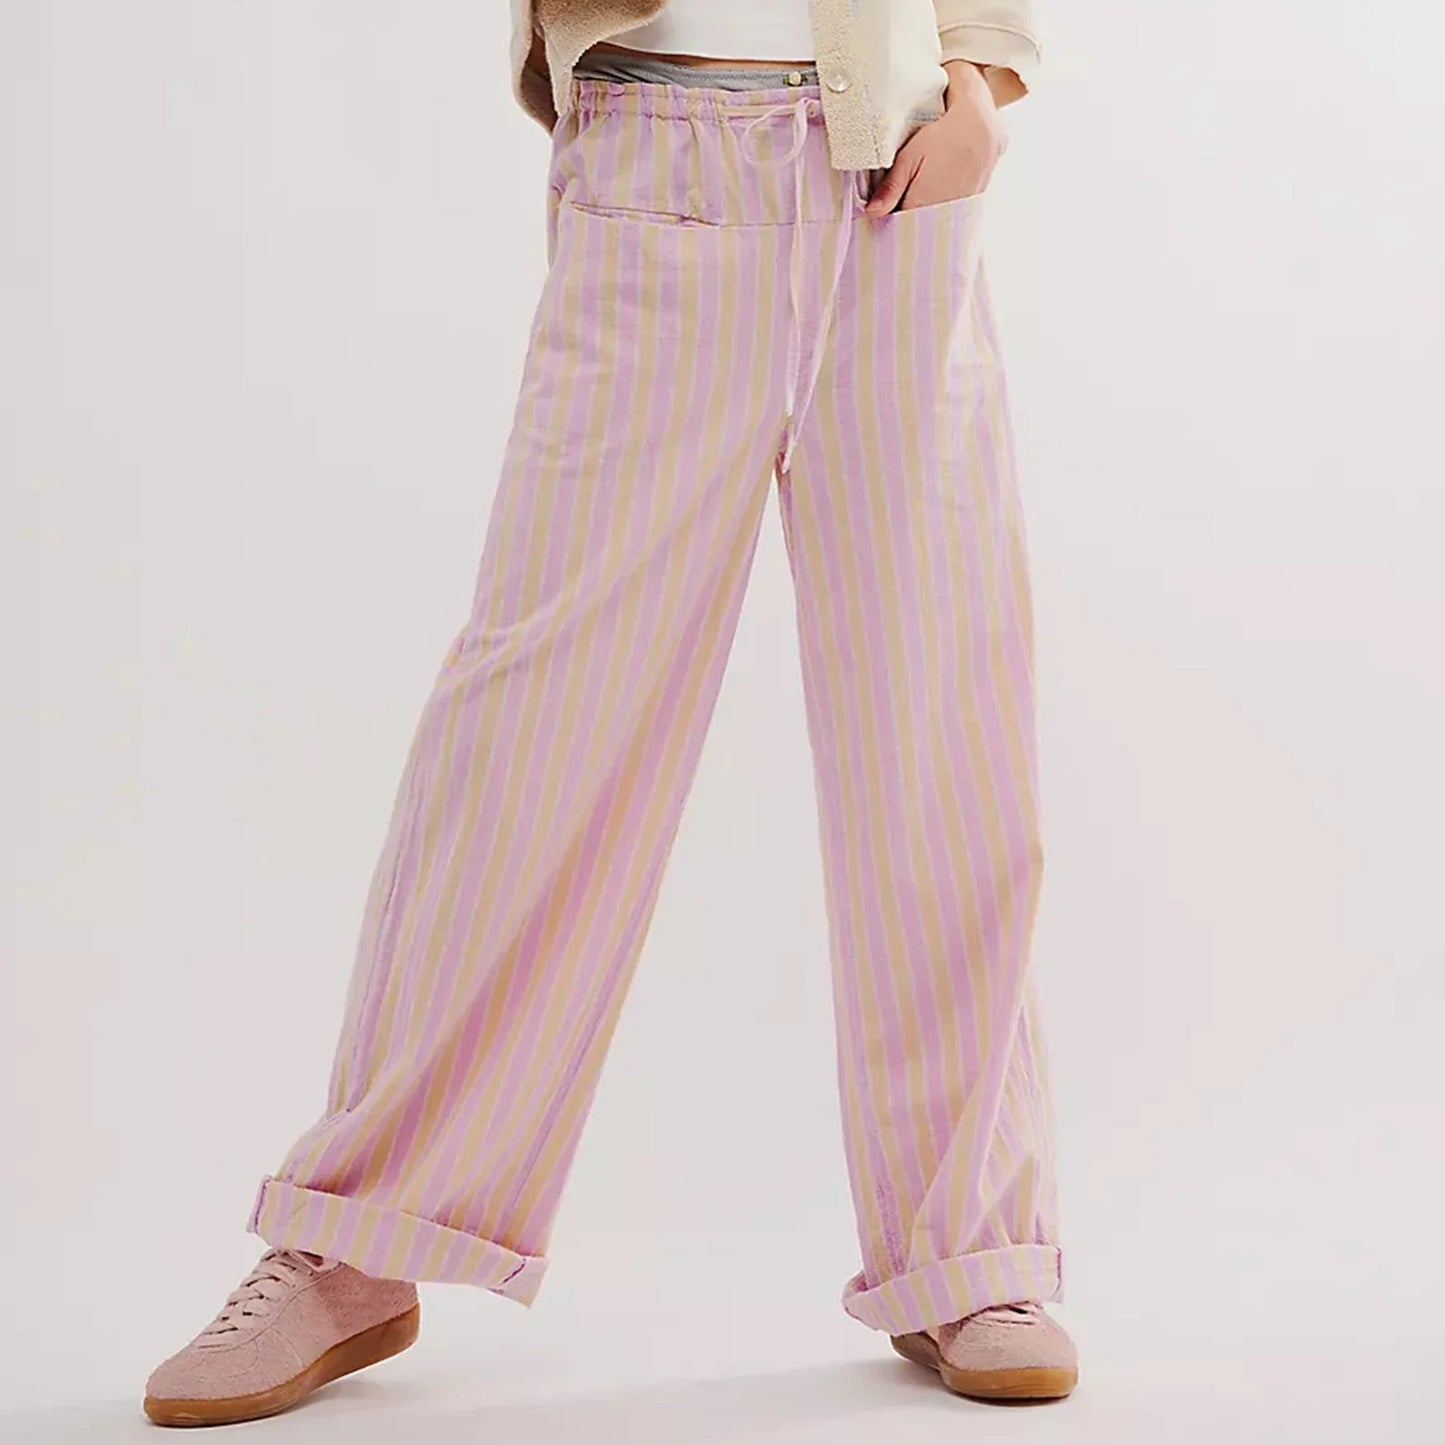 Baggy Drawstring Wide Striped Loose Multiple Pockets Fashion Casual Pants